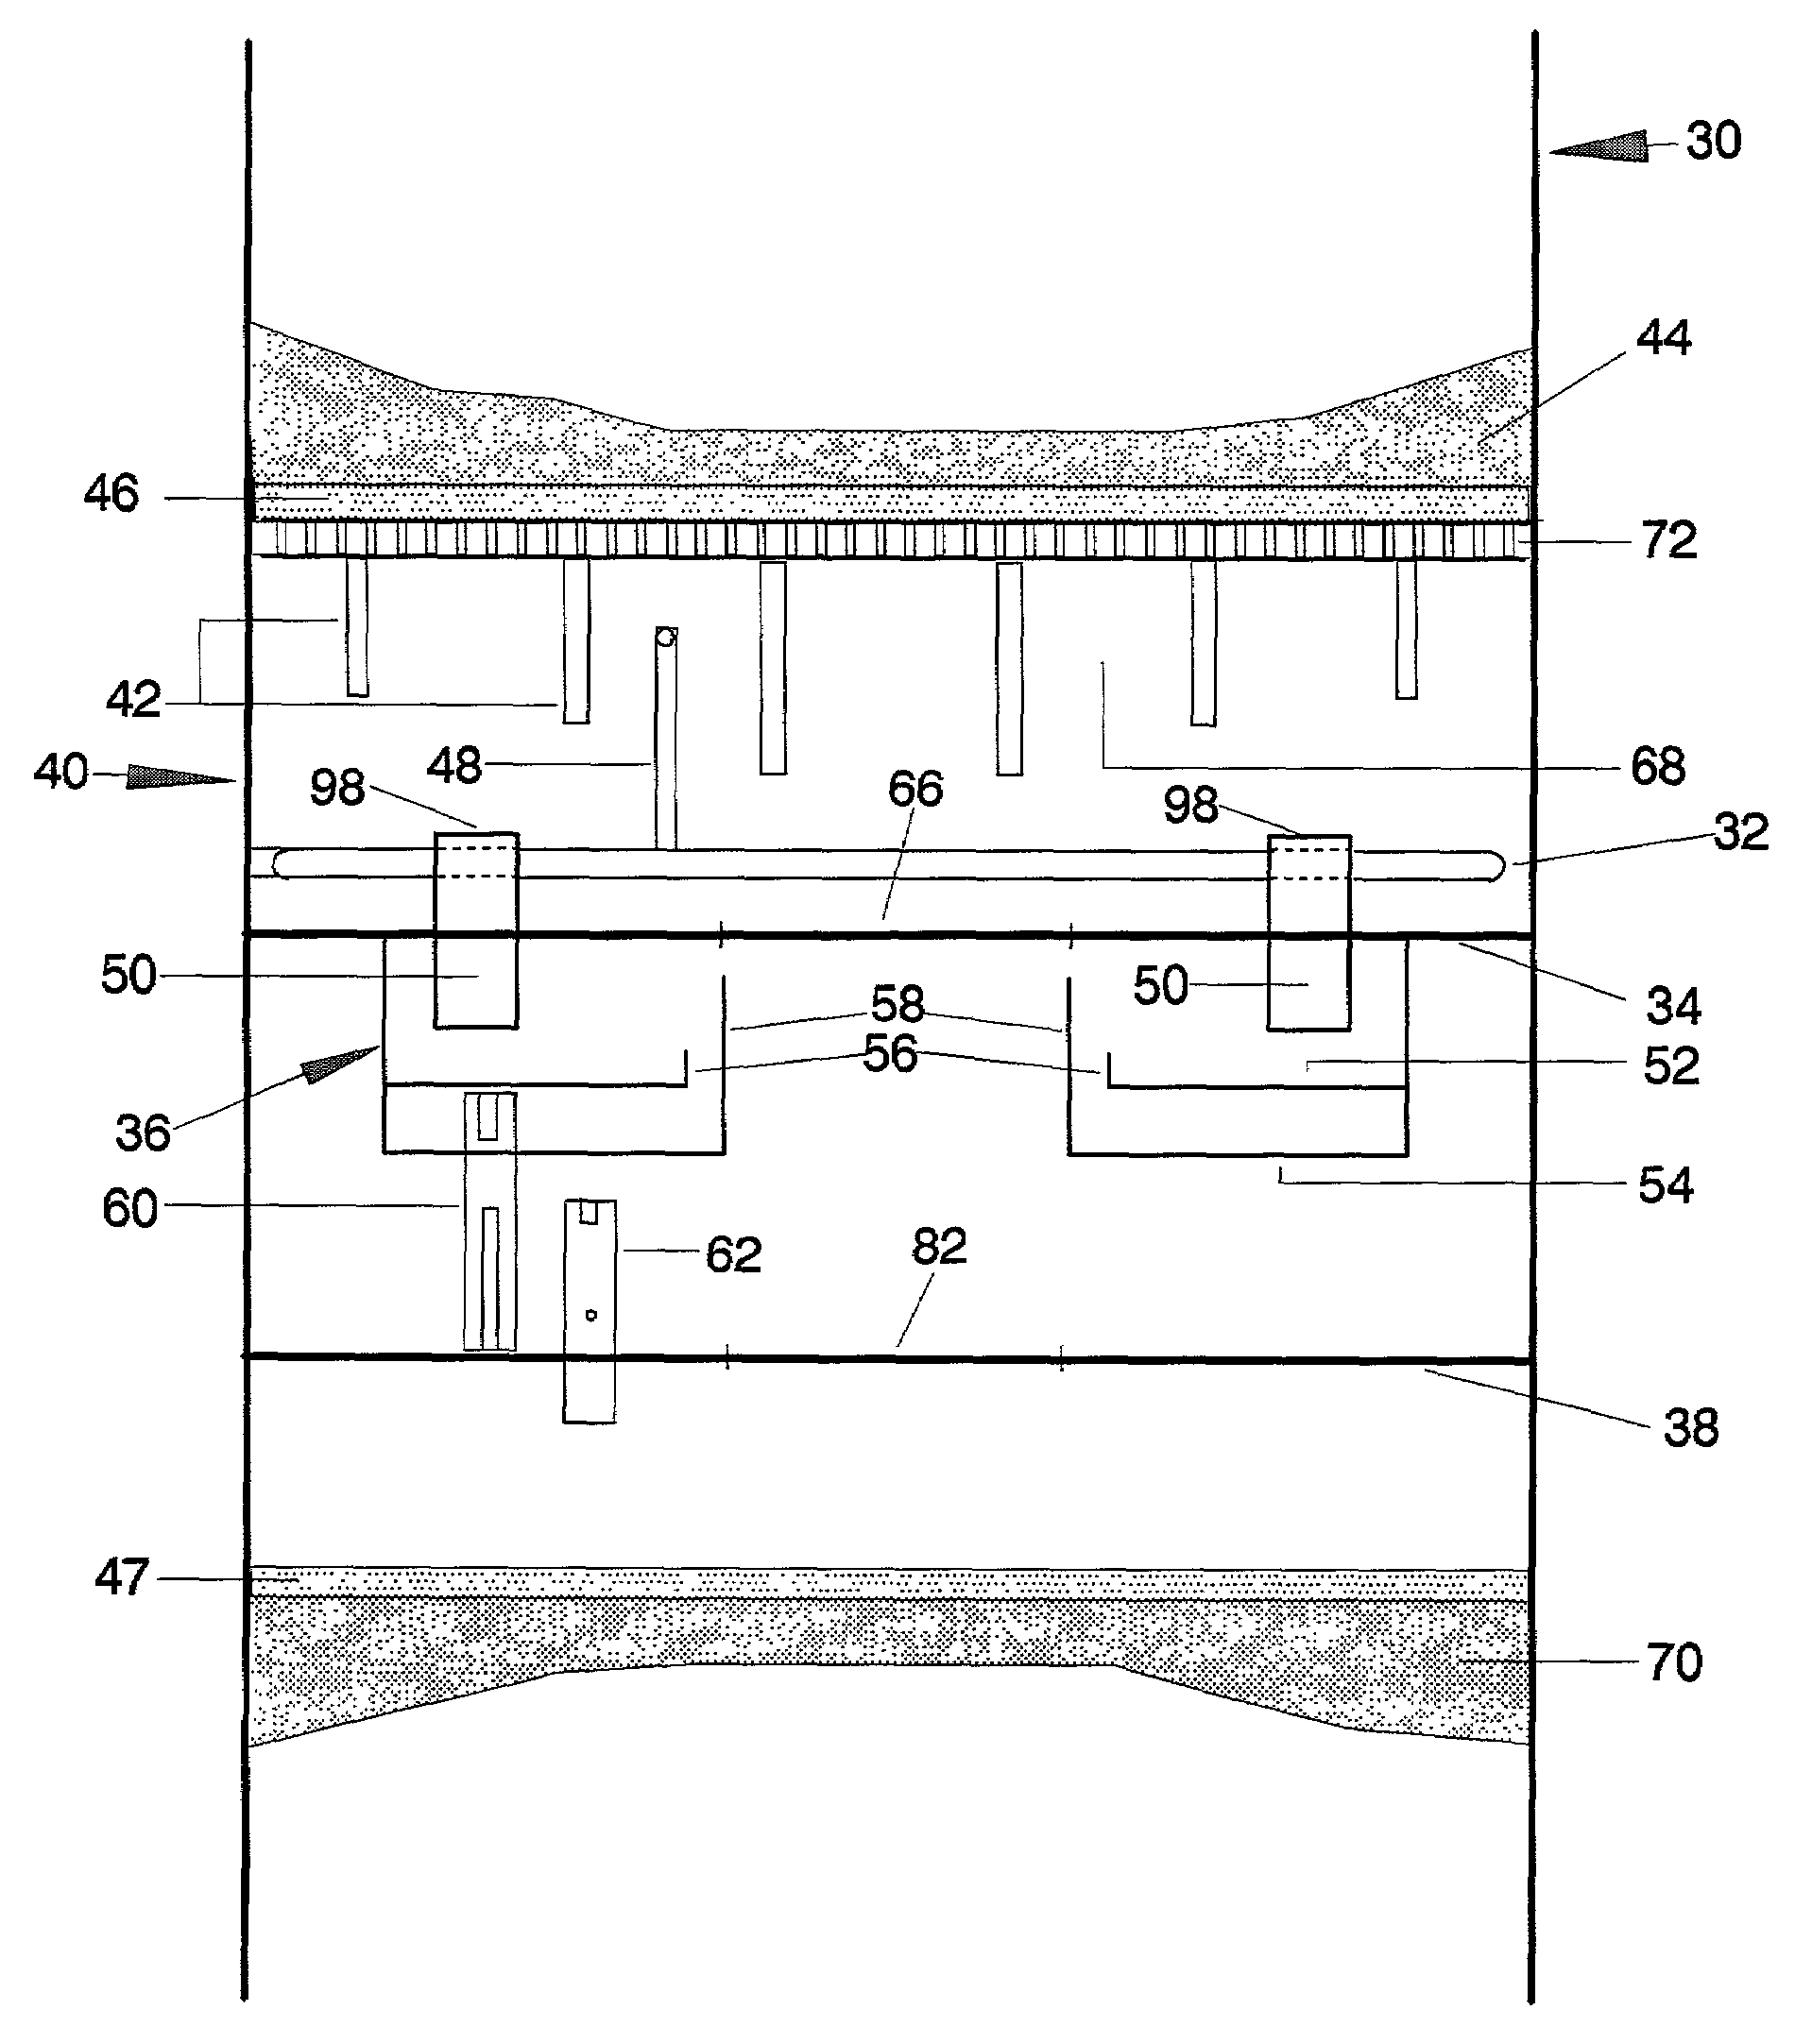 Quench box for a multi-bed, mixed-phase cocurrent downflow fixed-bed reactor